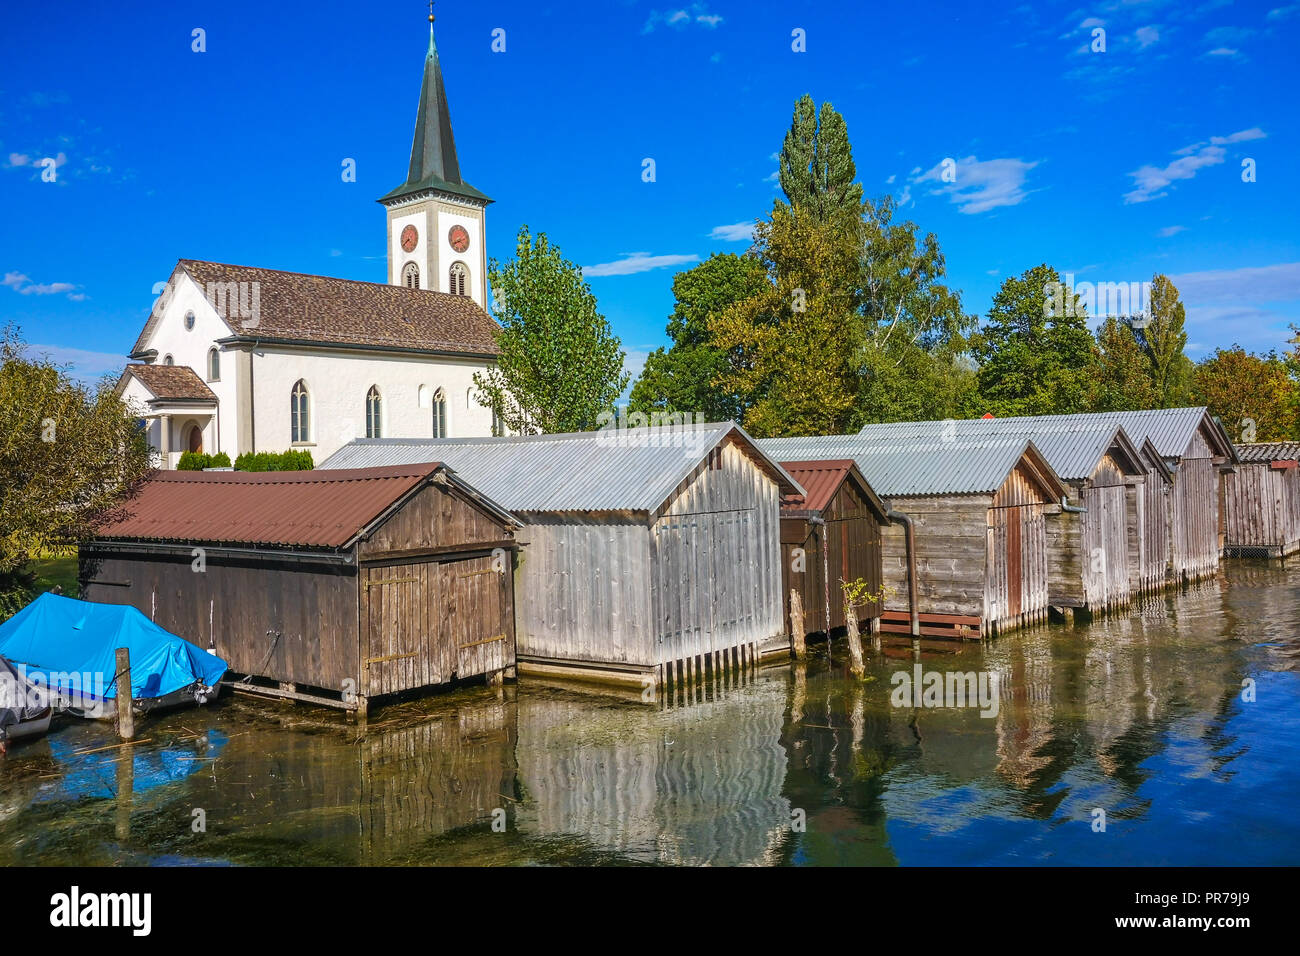 The beautiful historical village of Busskirch on the shores of the Upper Zurich Lake (Obersee), Rapperswil-Jona, Sankt Gallen, Switzerland Stock Photo